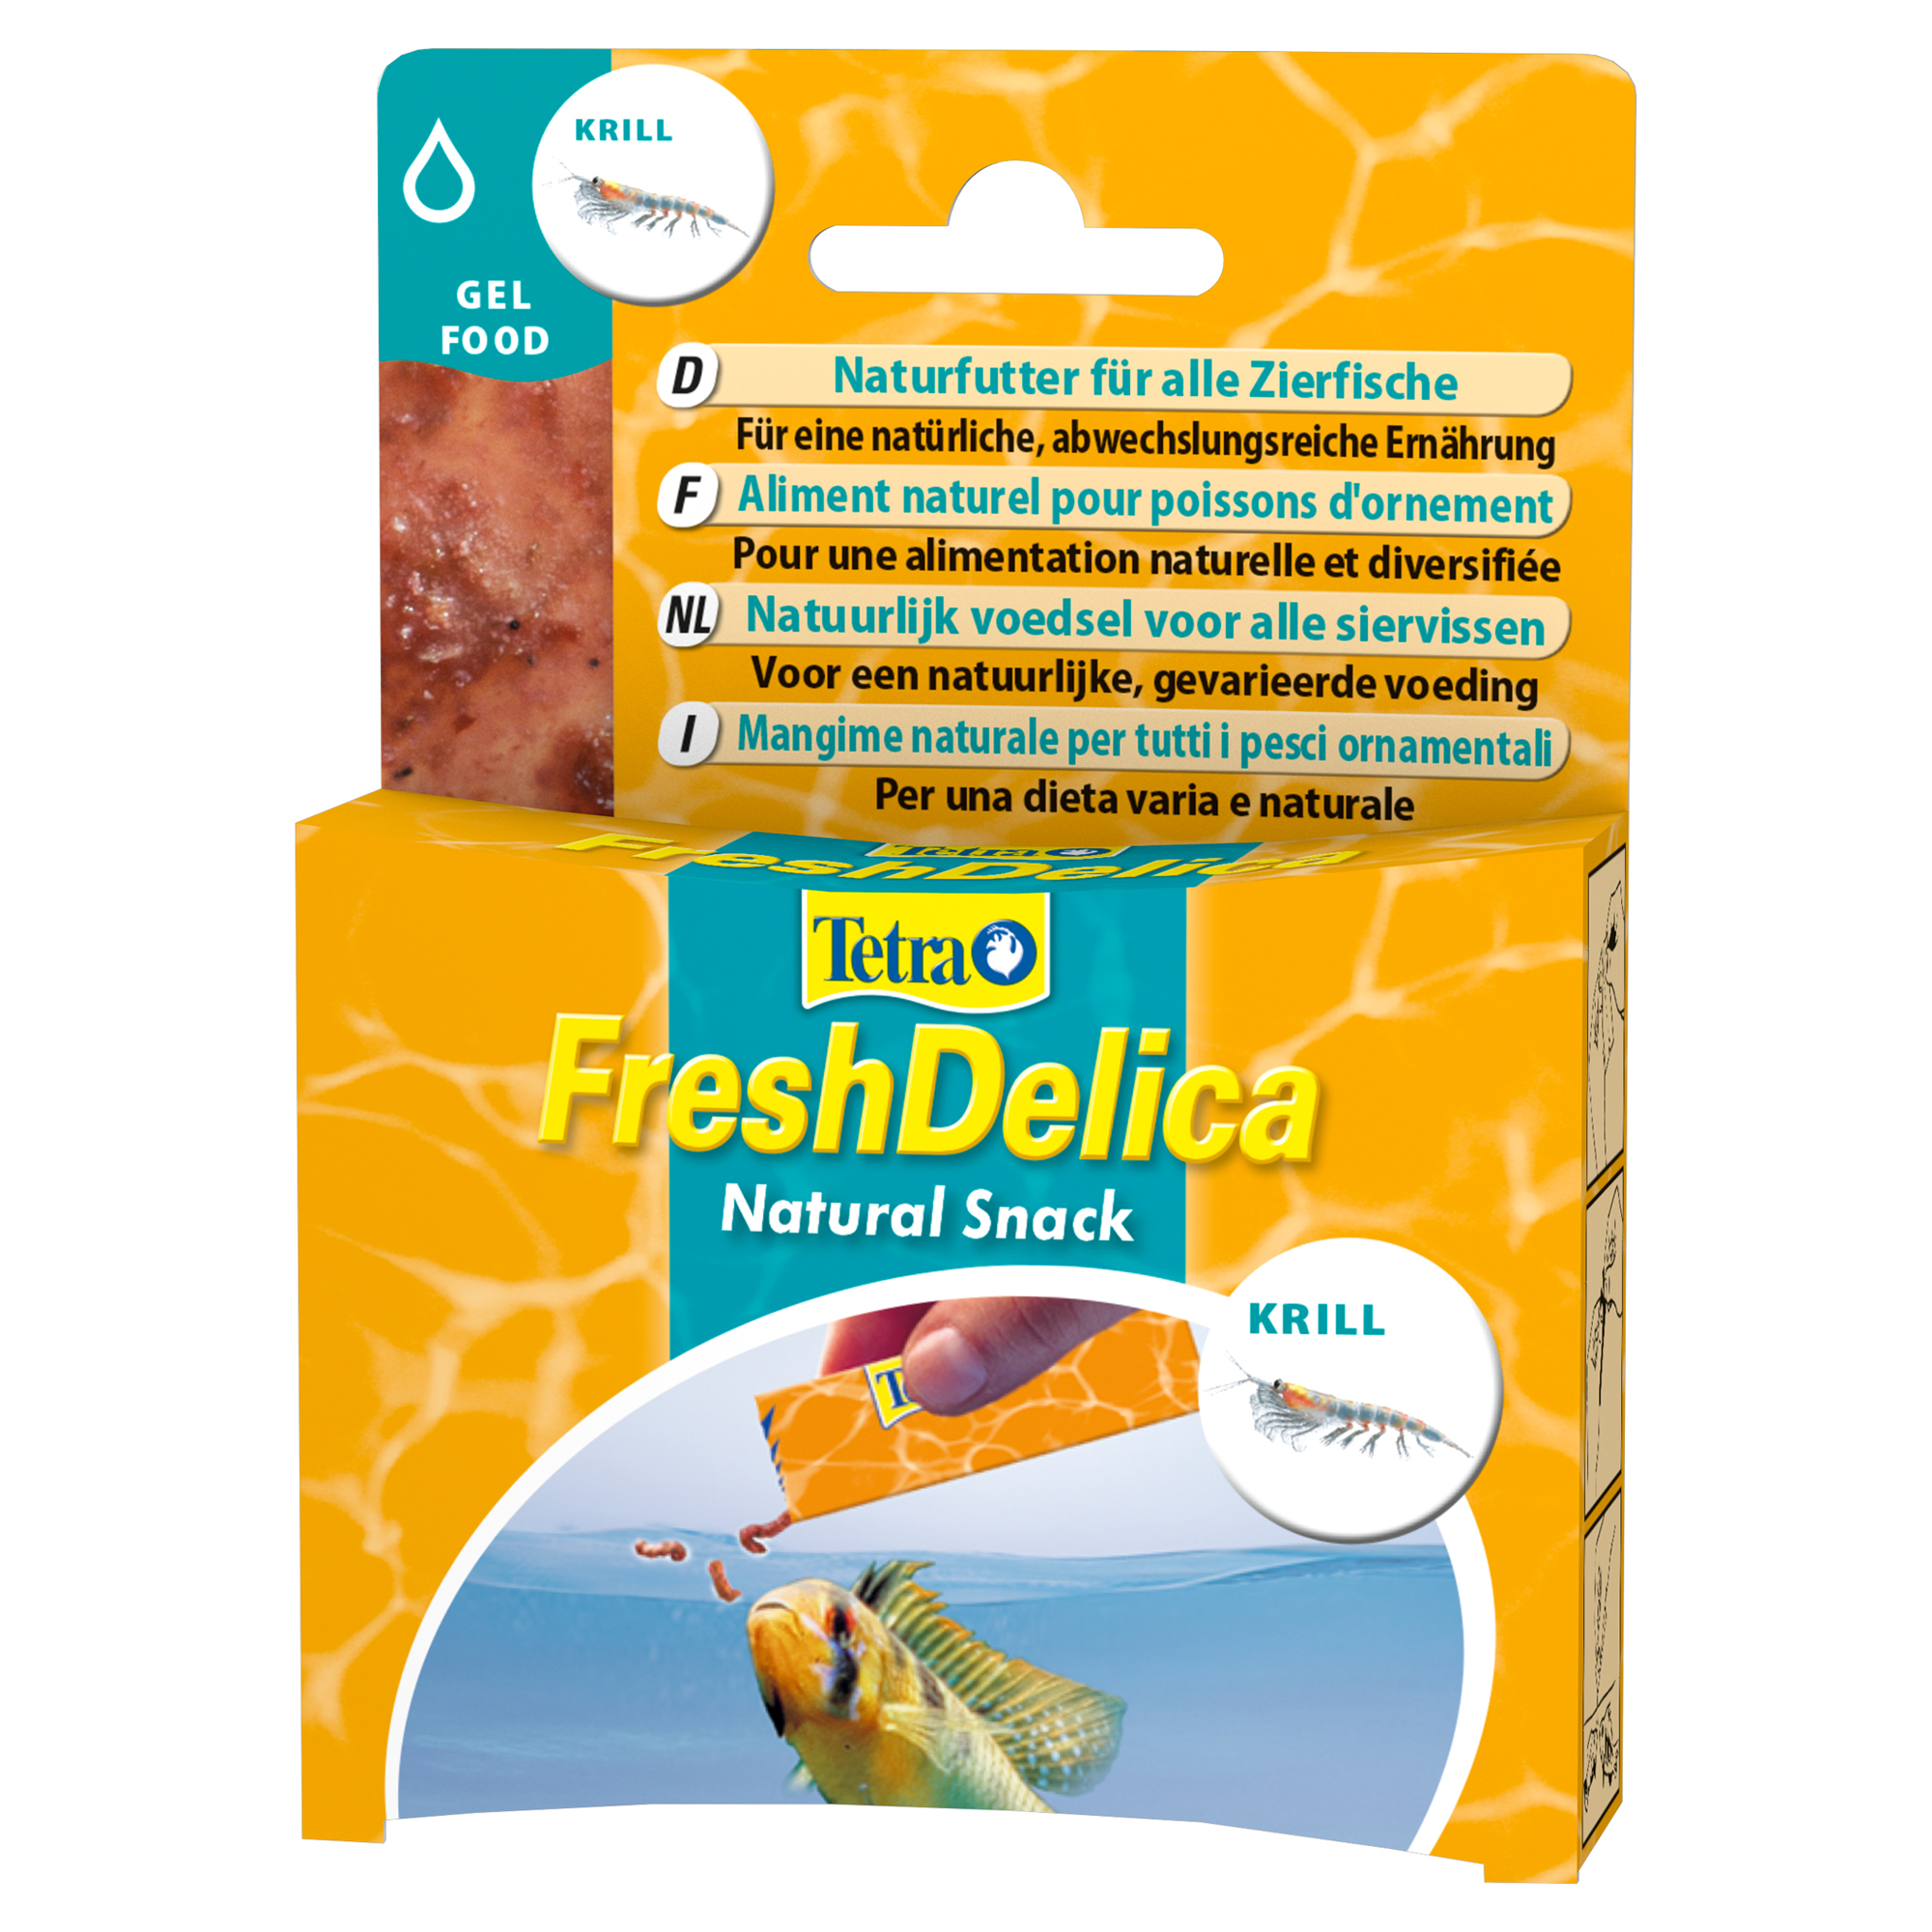 Fischfutter "Fresh Delica" 48 g Natural Snack Krill + product picture